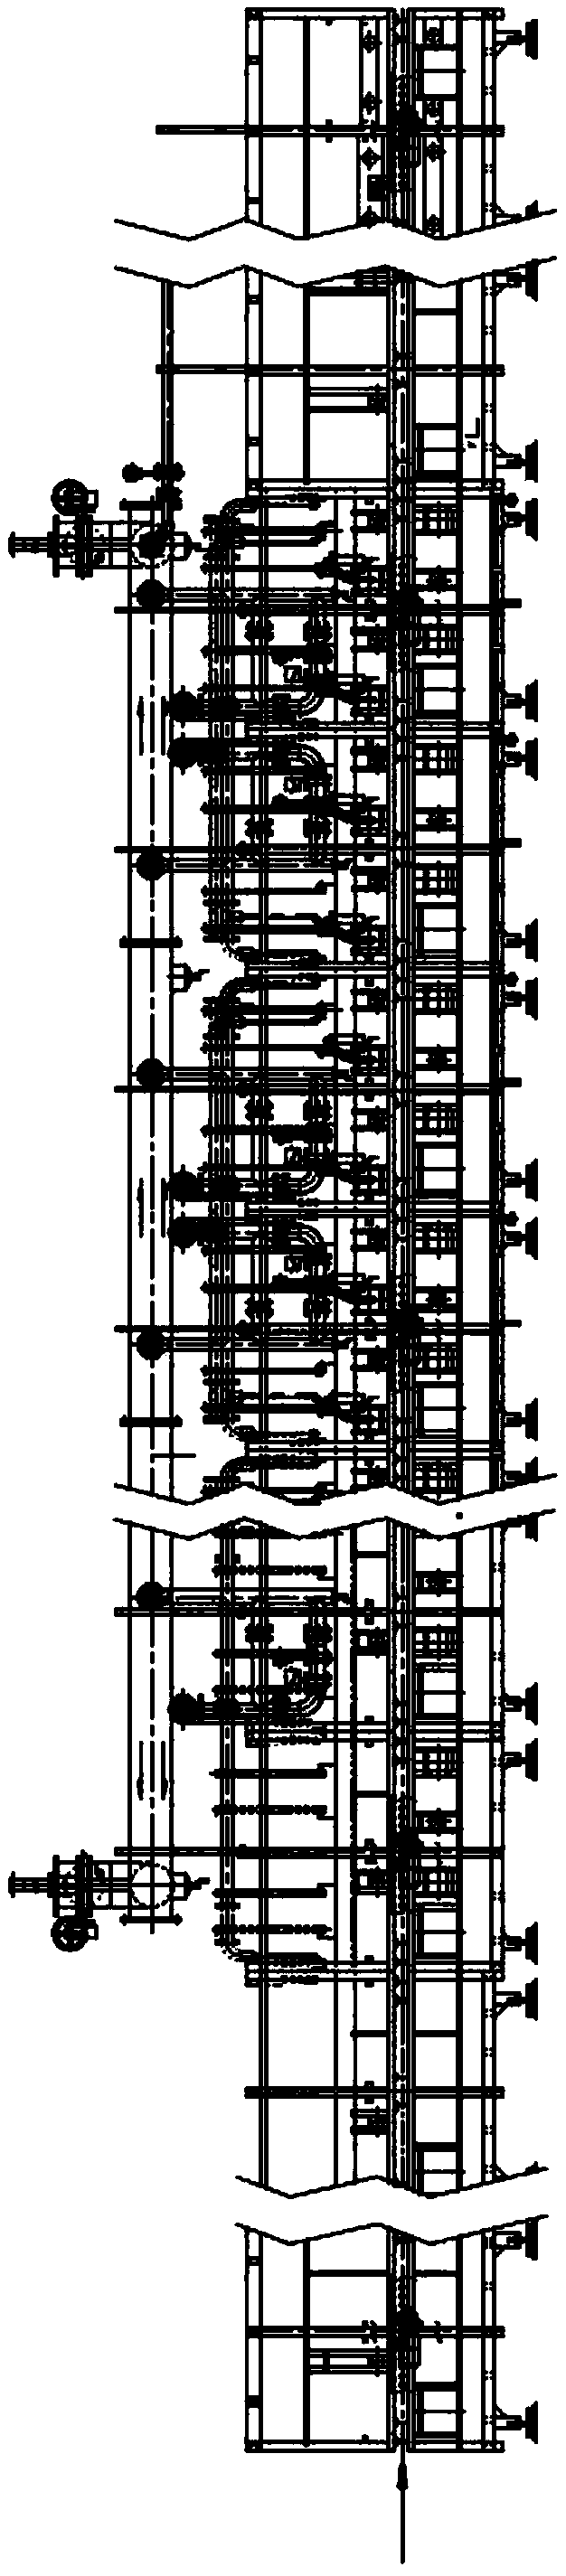 Water gas combustion pipeline structure